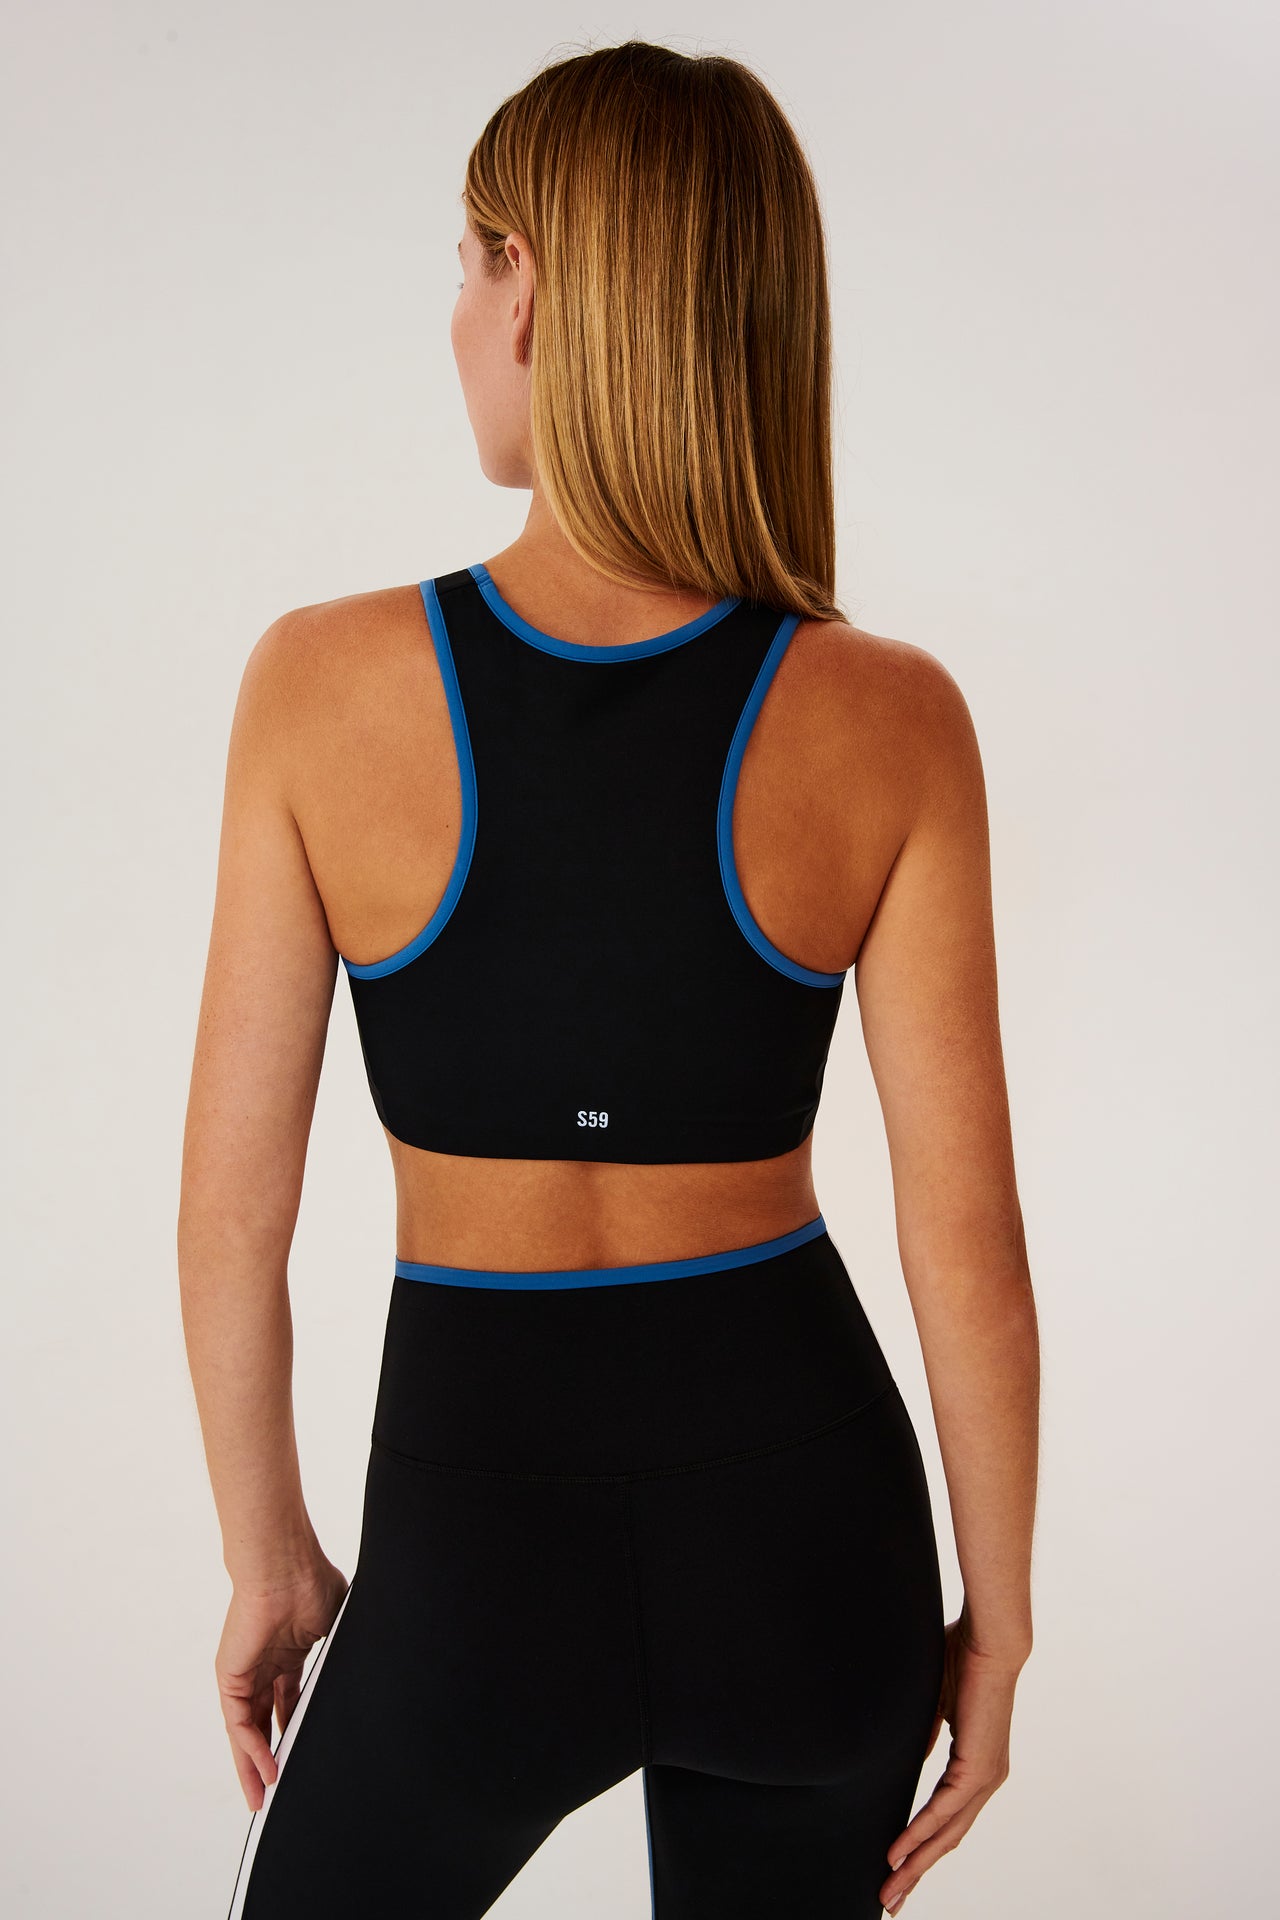 Back view of girl wearing black sports bra with blue hem and black leggings with blue stripe around the waistband and white stripe down the outer seam